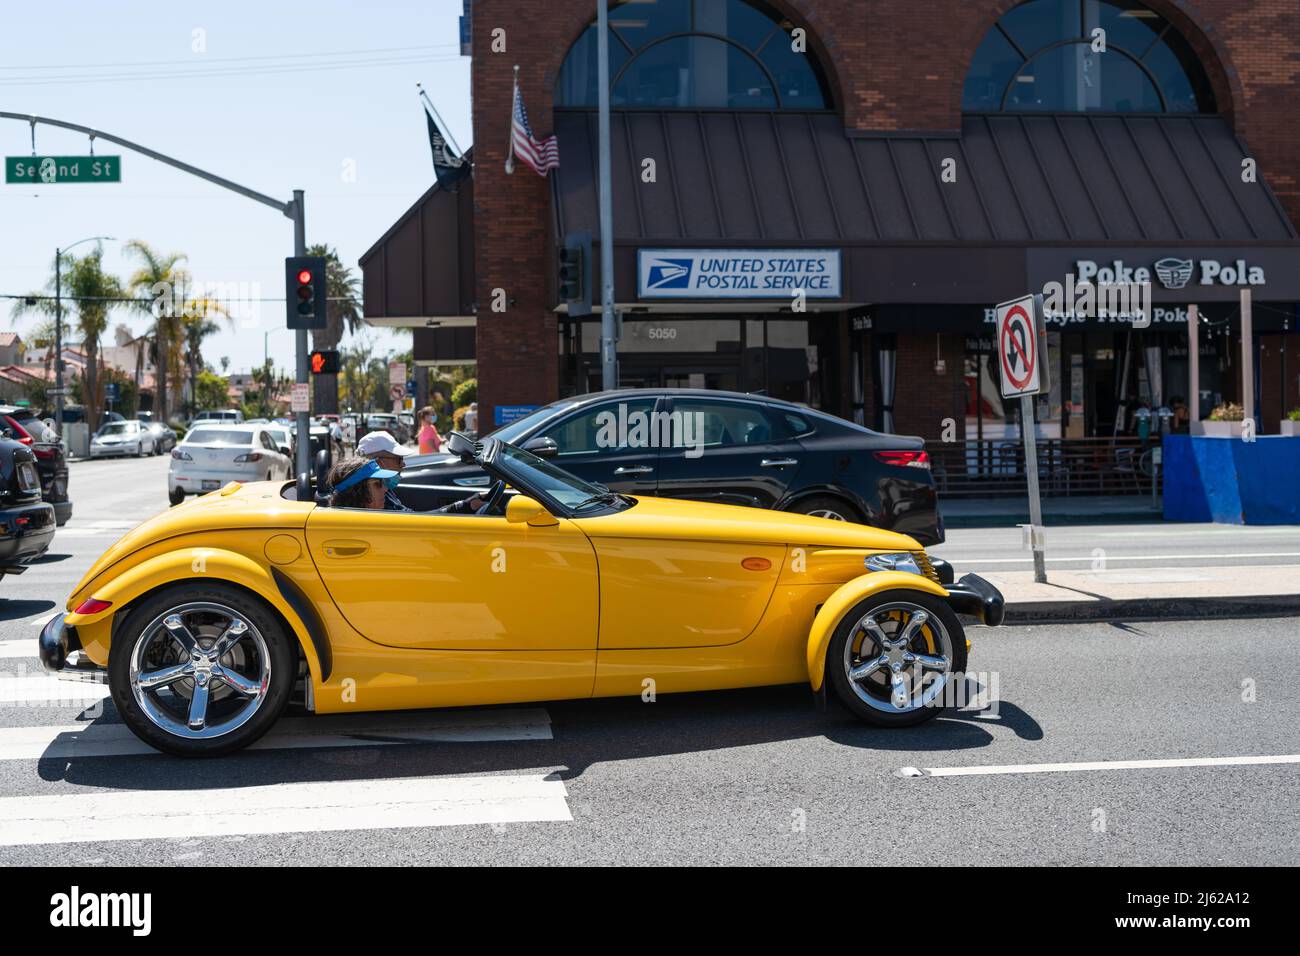 Long Beach, California USA - March 31, 2021: classic car of Chrysler Plymouth Prowler. side view. Stock Photo